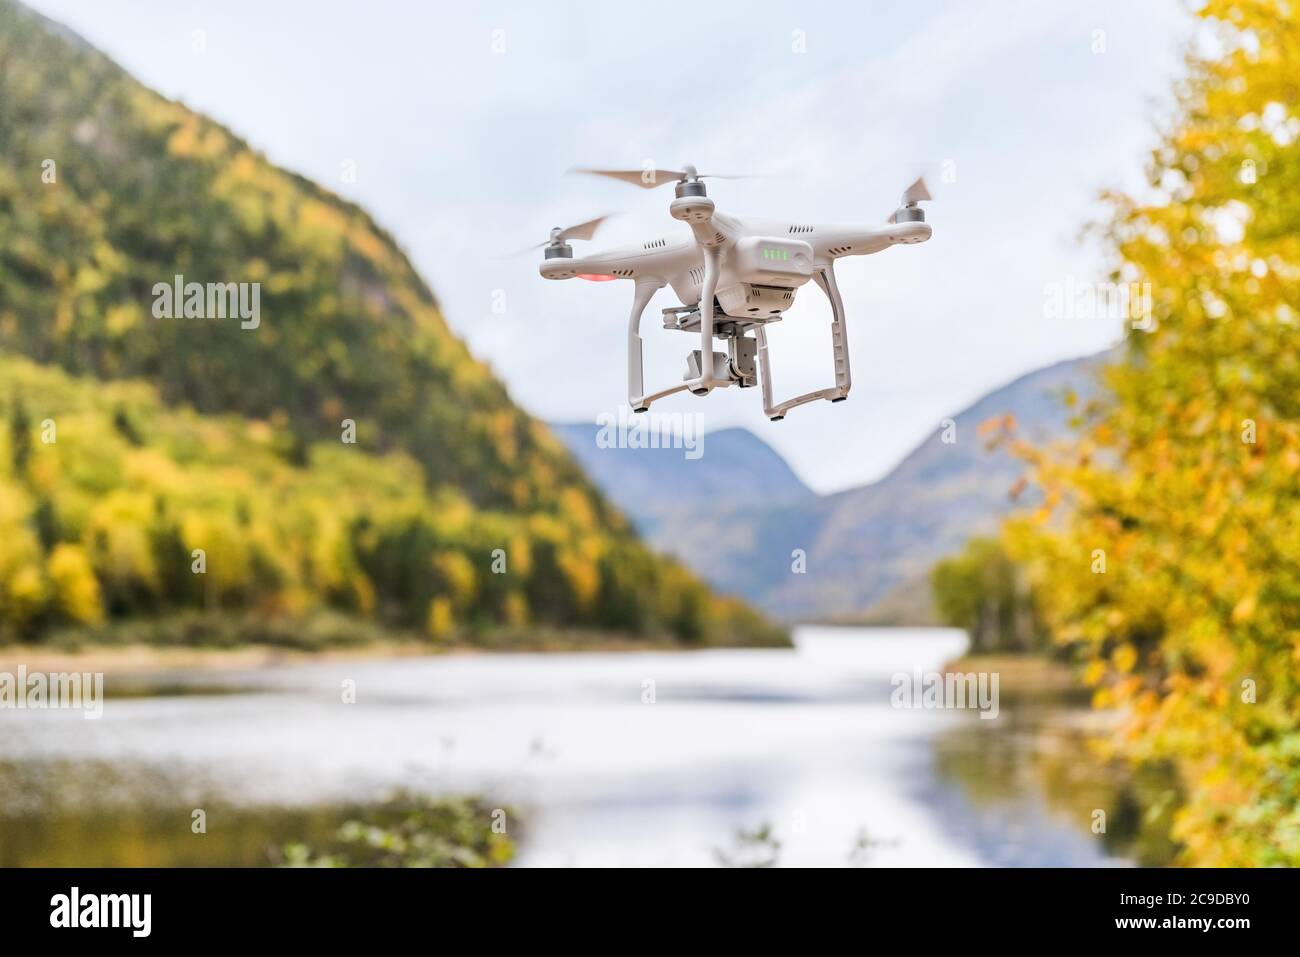 Drone uav flying in the air taking video of autumn forest foliage nature landscape in outdoors during fall season. Quad copter with digital camera Stock Photo